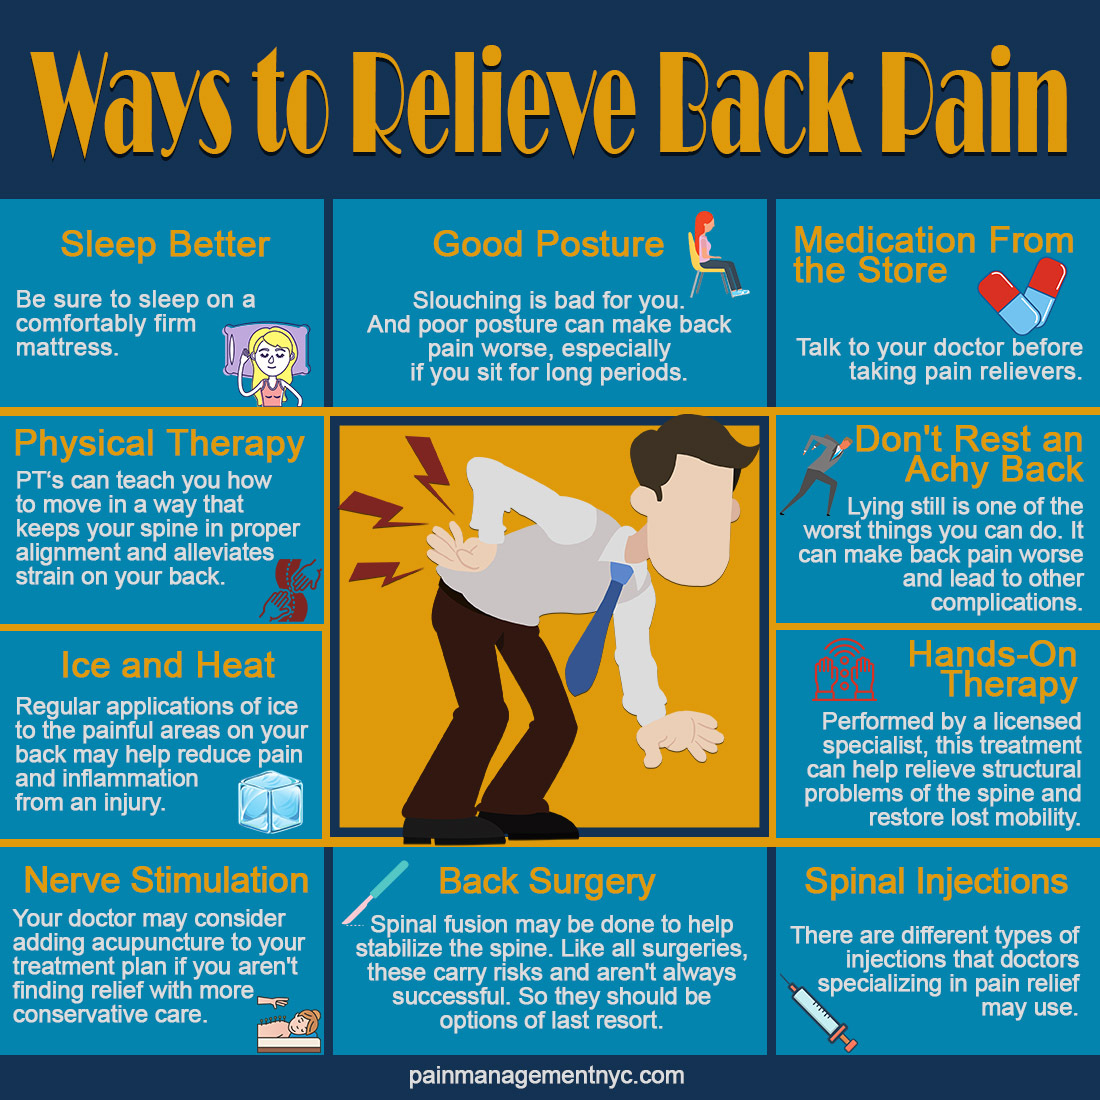 Ways to Relieve Back Pain'